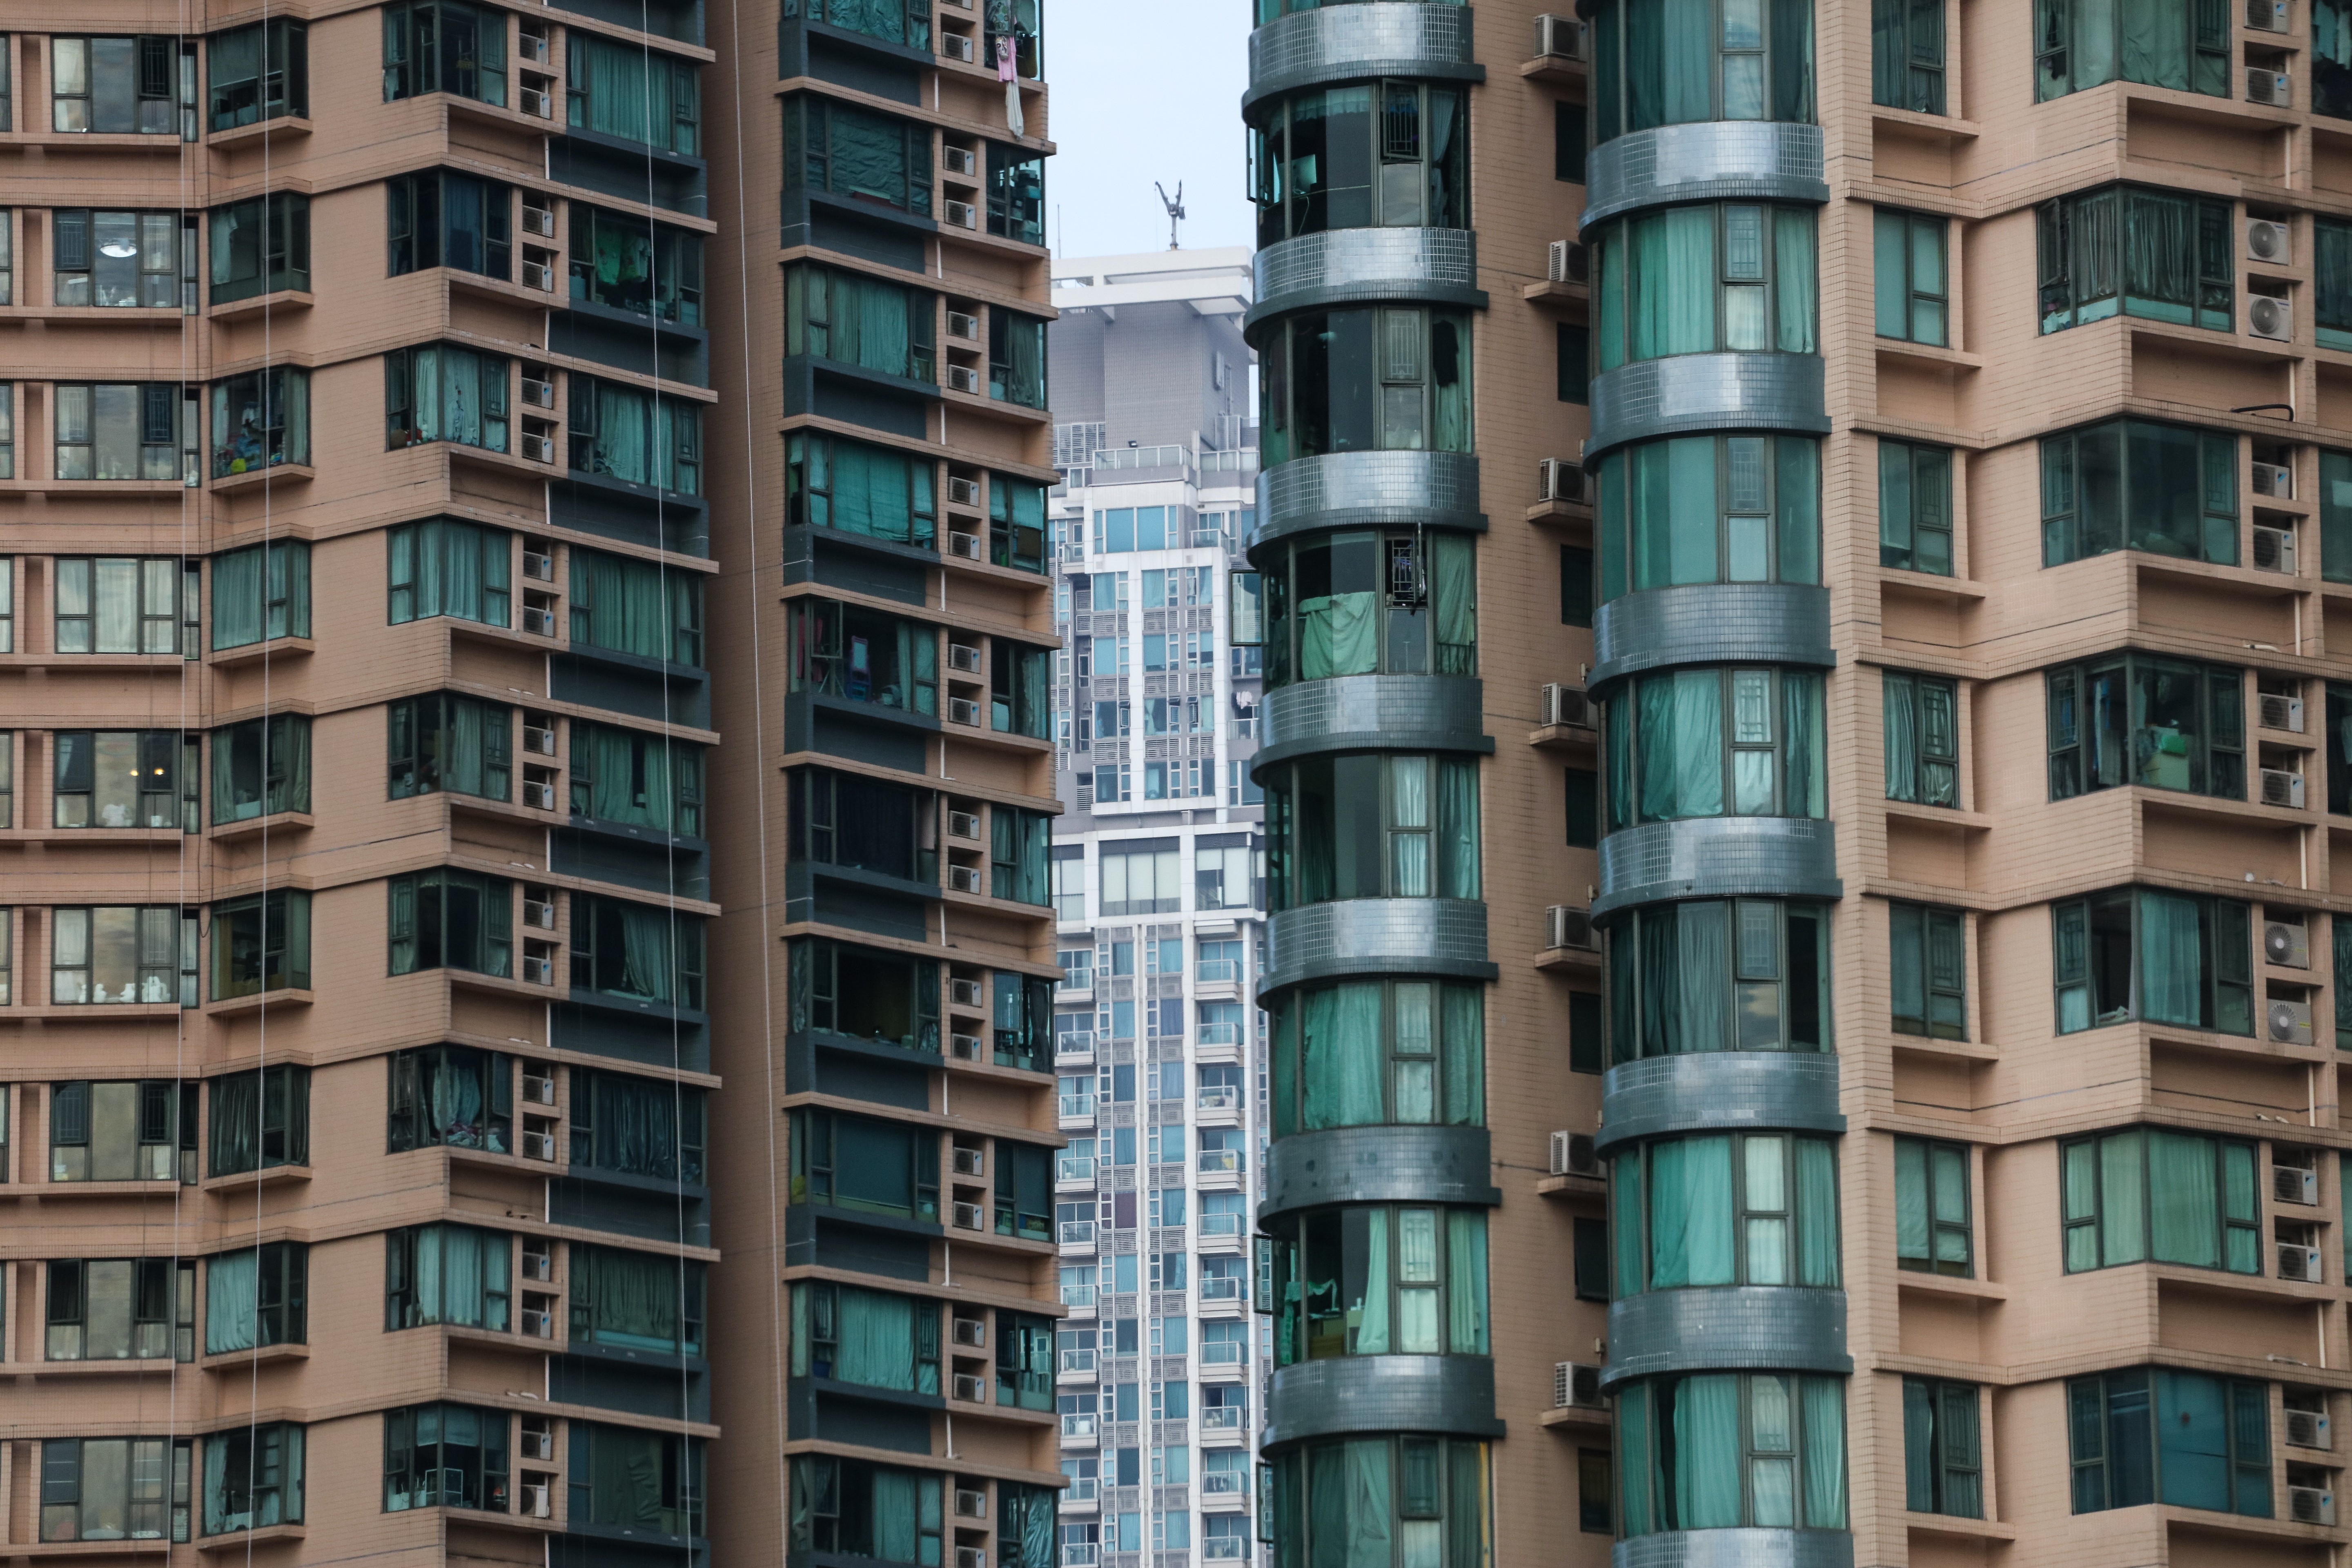 One analyst says essential services personnel, such as nurses and police offers, should enjoy special consideration when it comes to public housing. Photo: Felix Wong